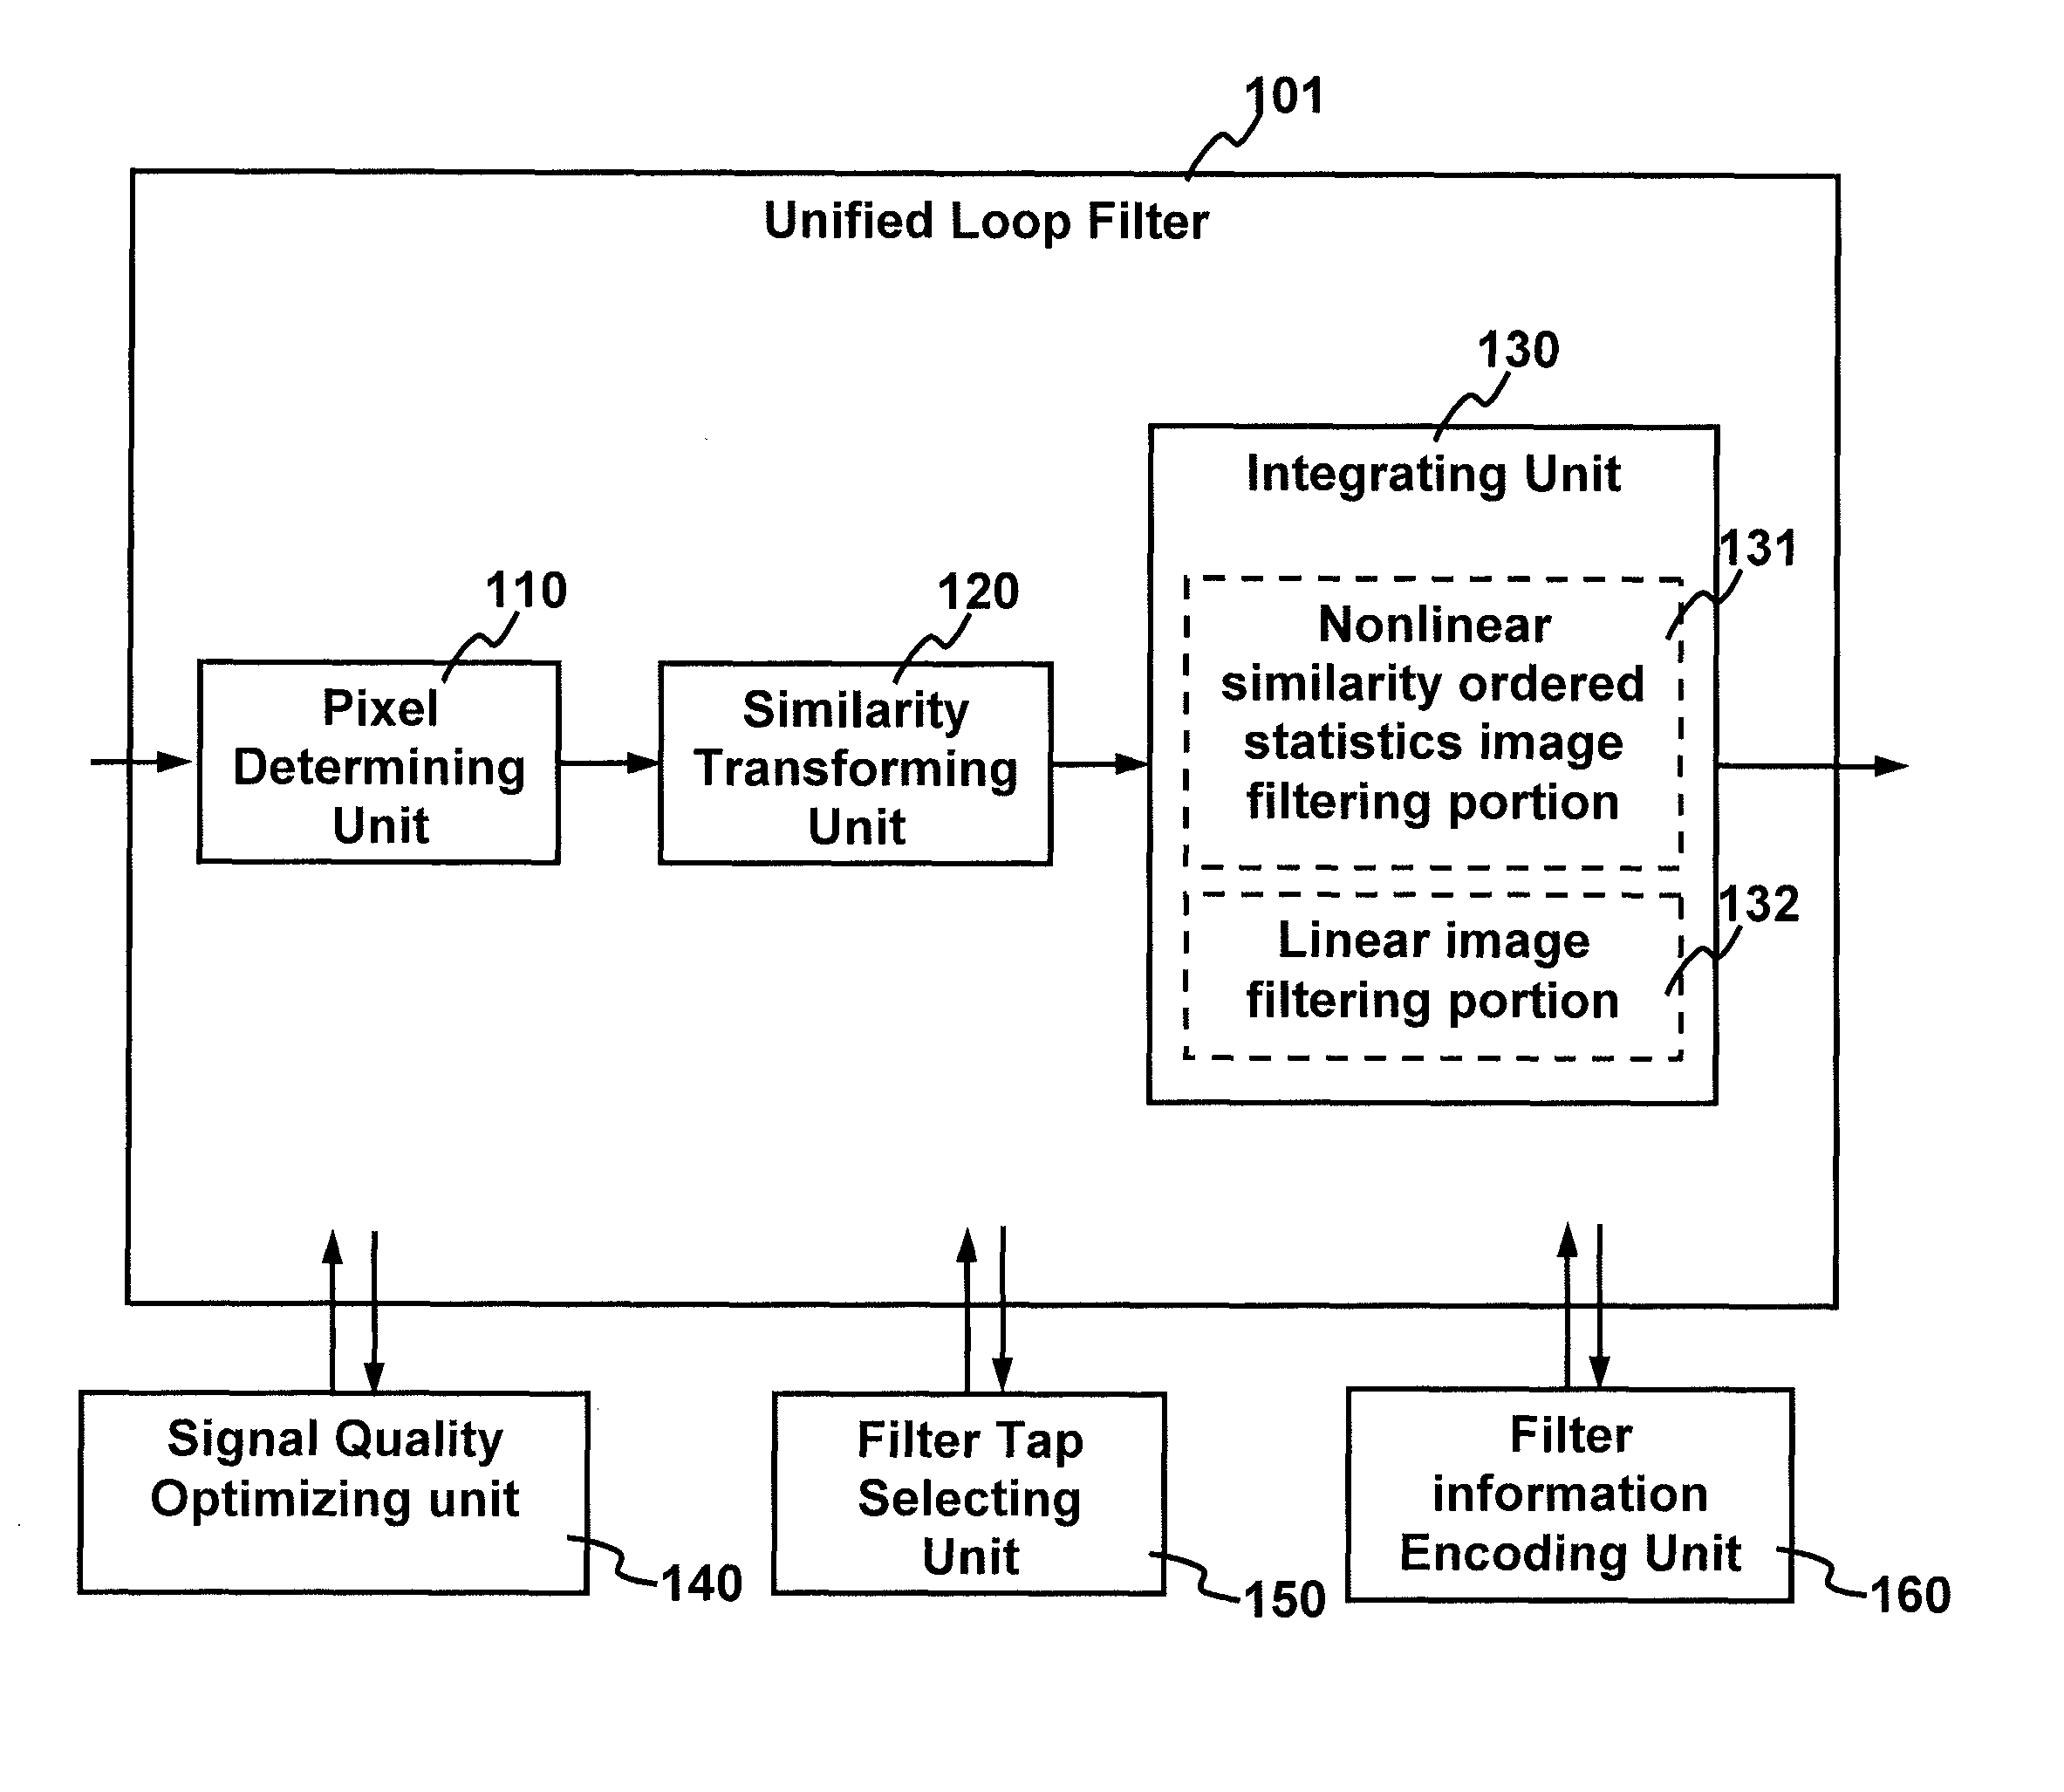 Method and apparatus for improving video quality by utilizing a unified loop filter